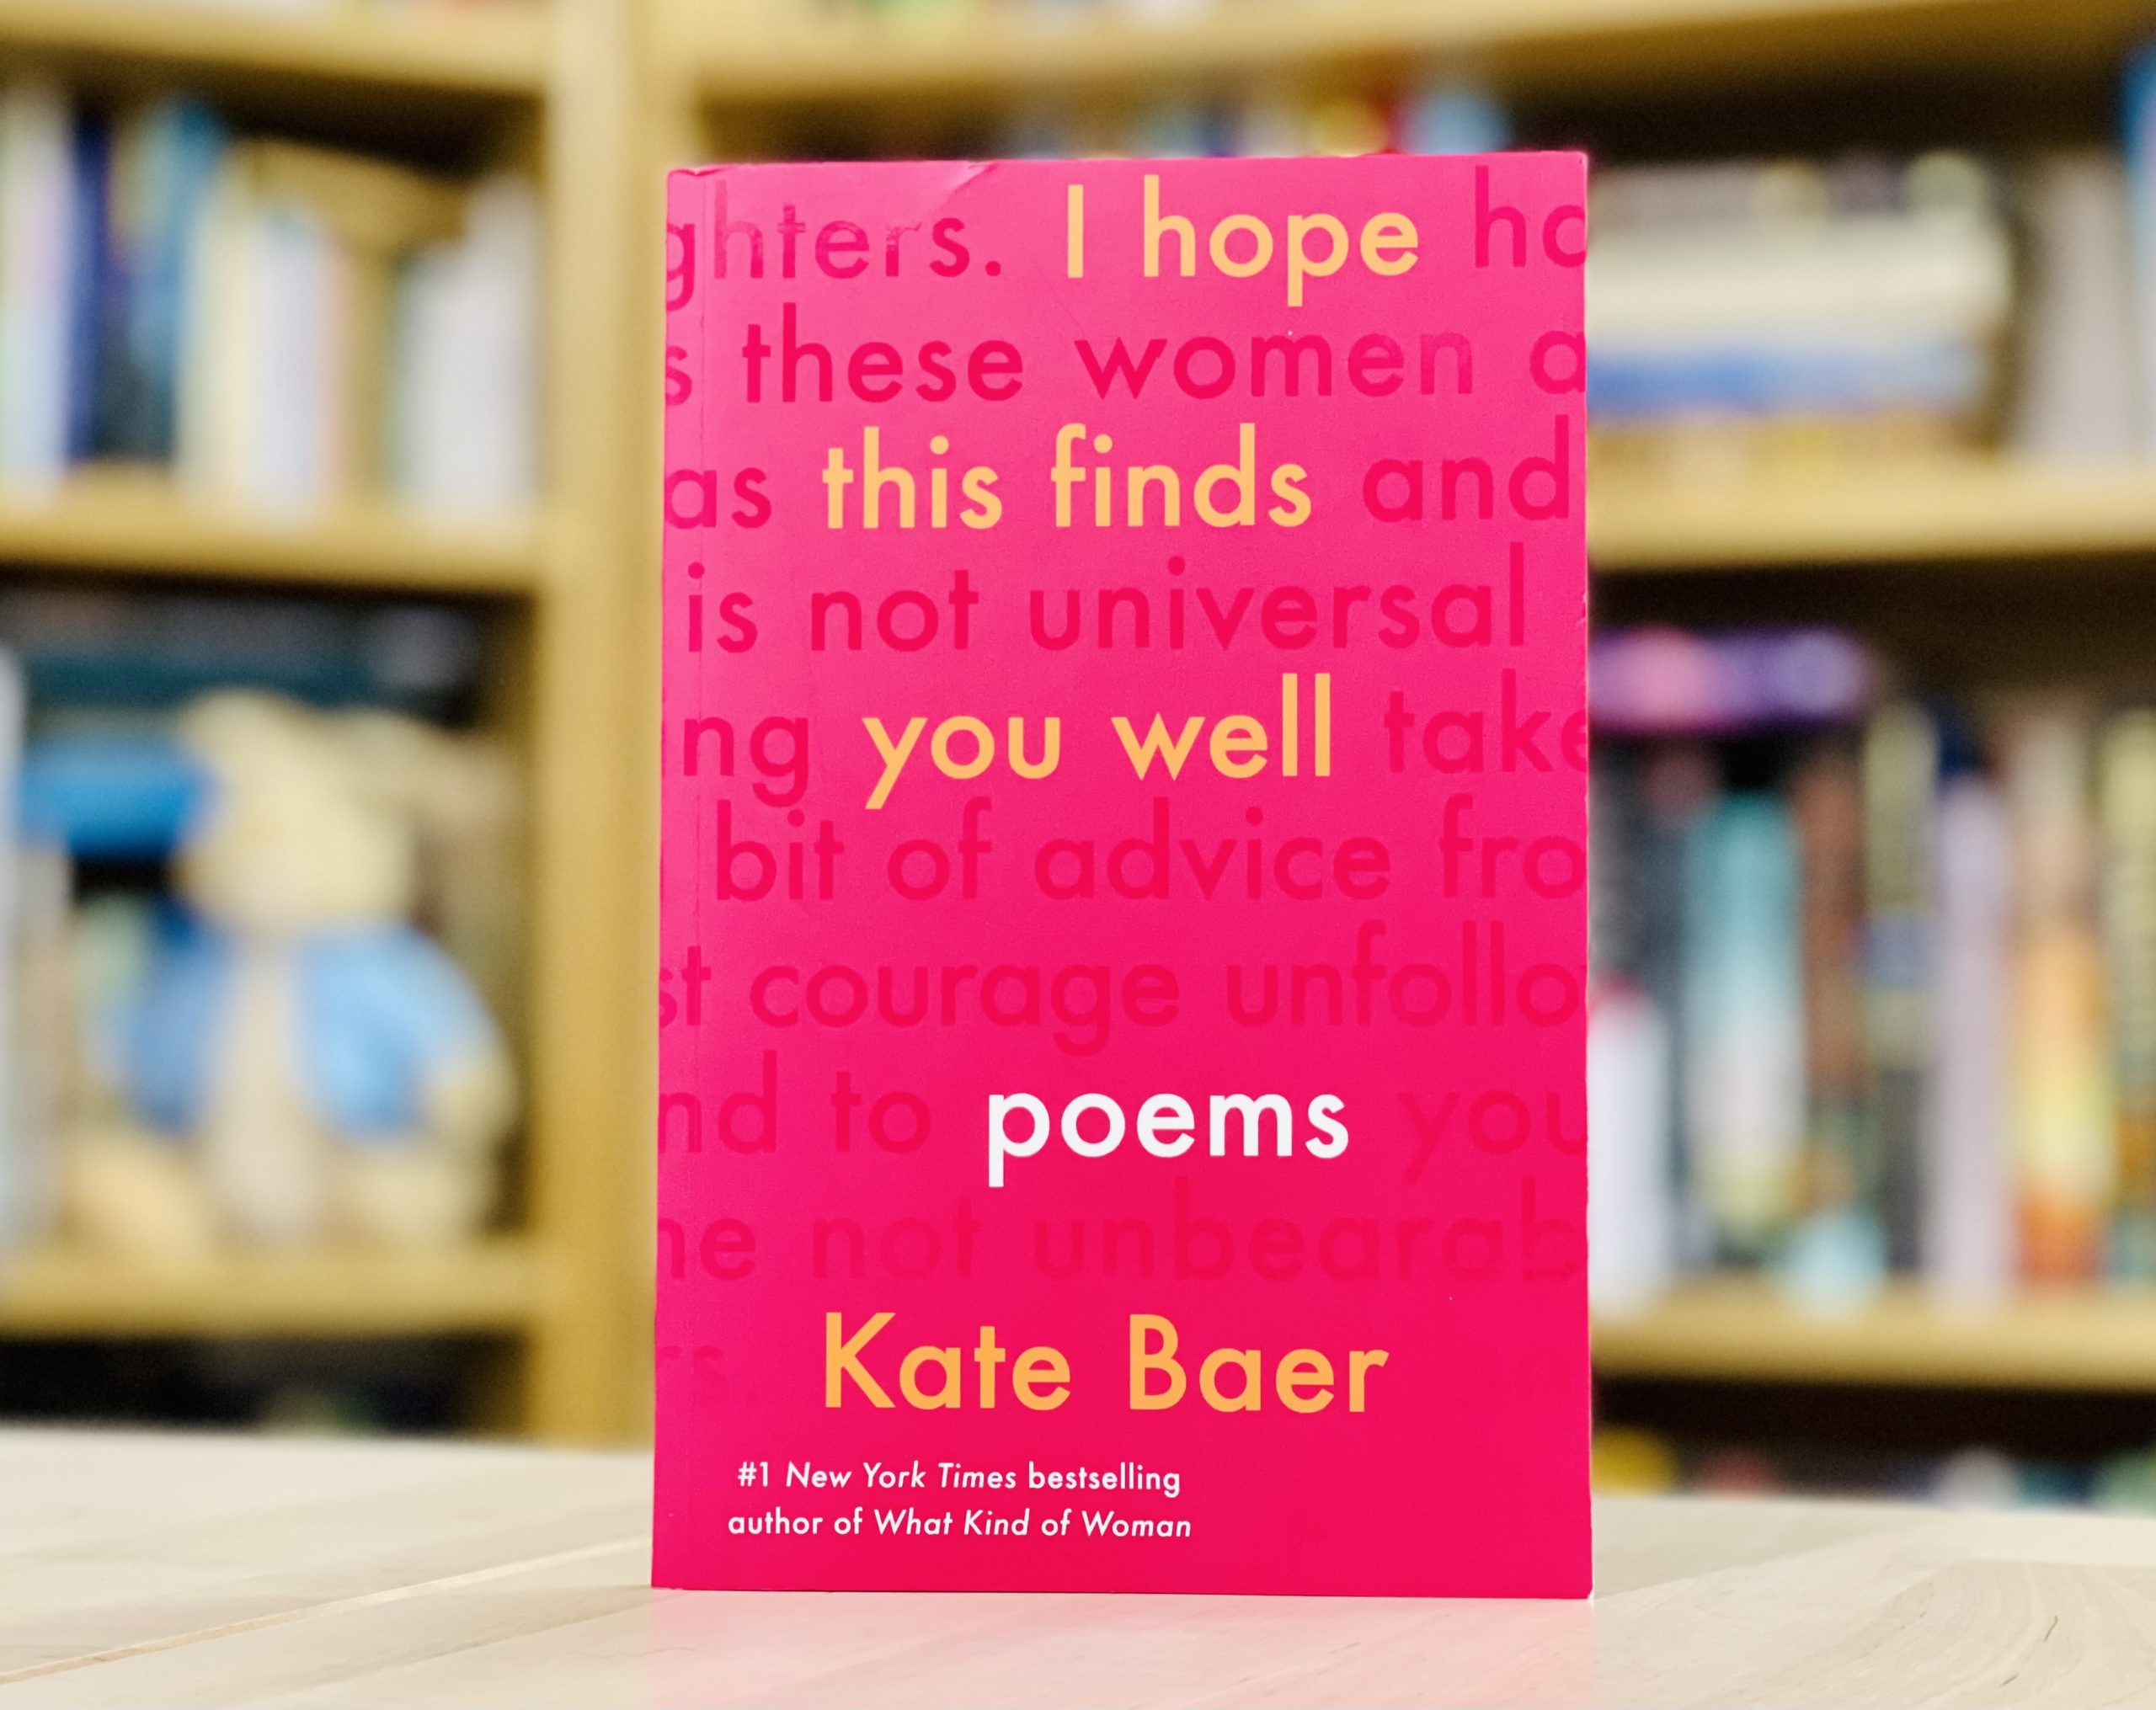 I hope this finds you well by Kate Baer